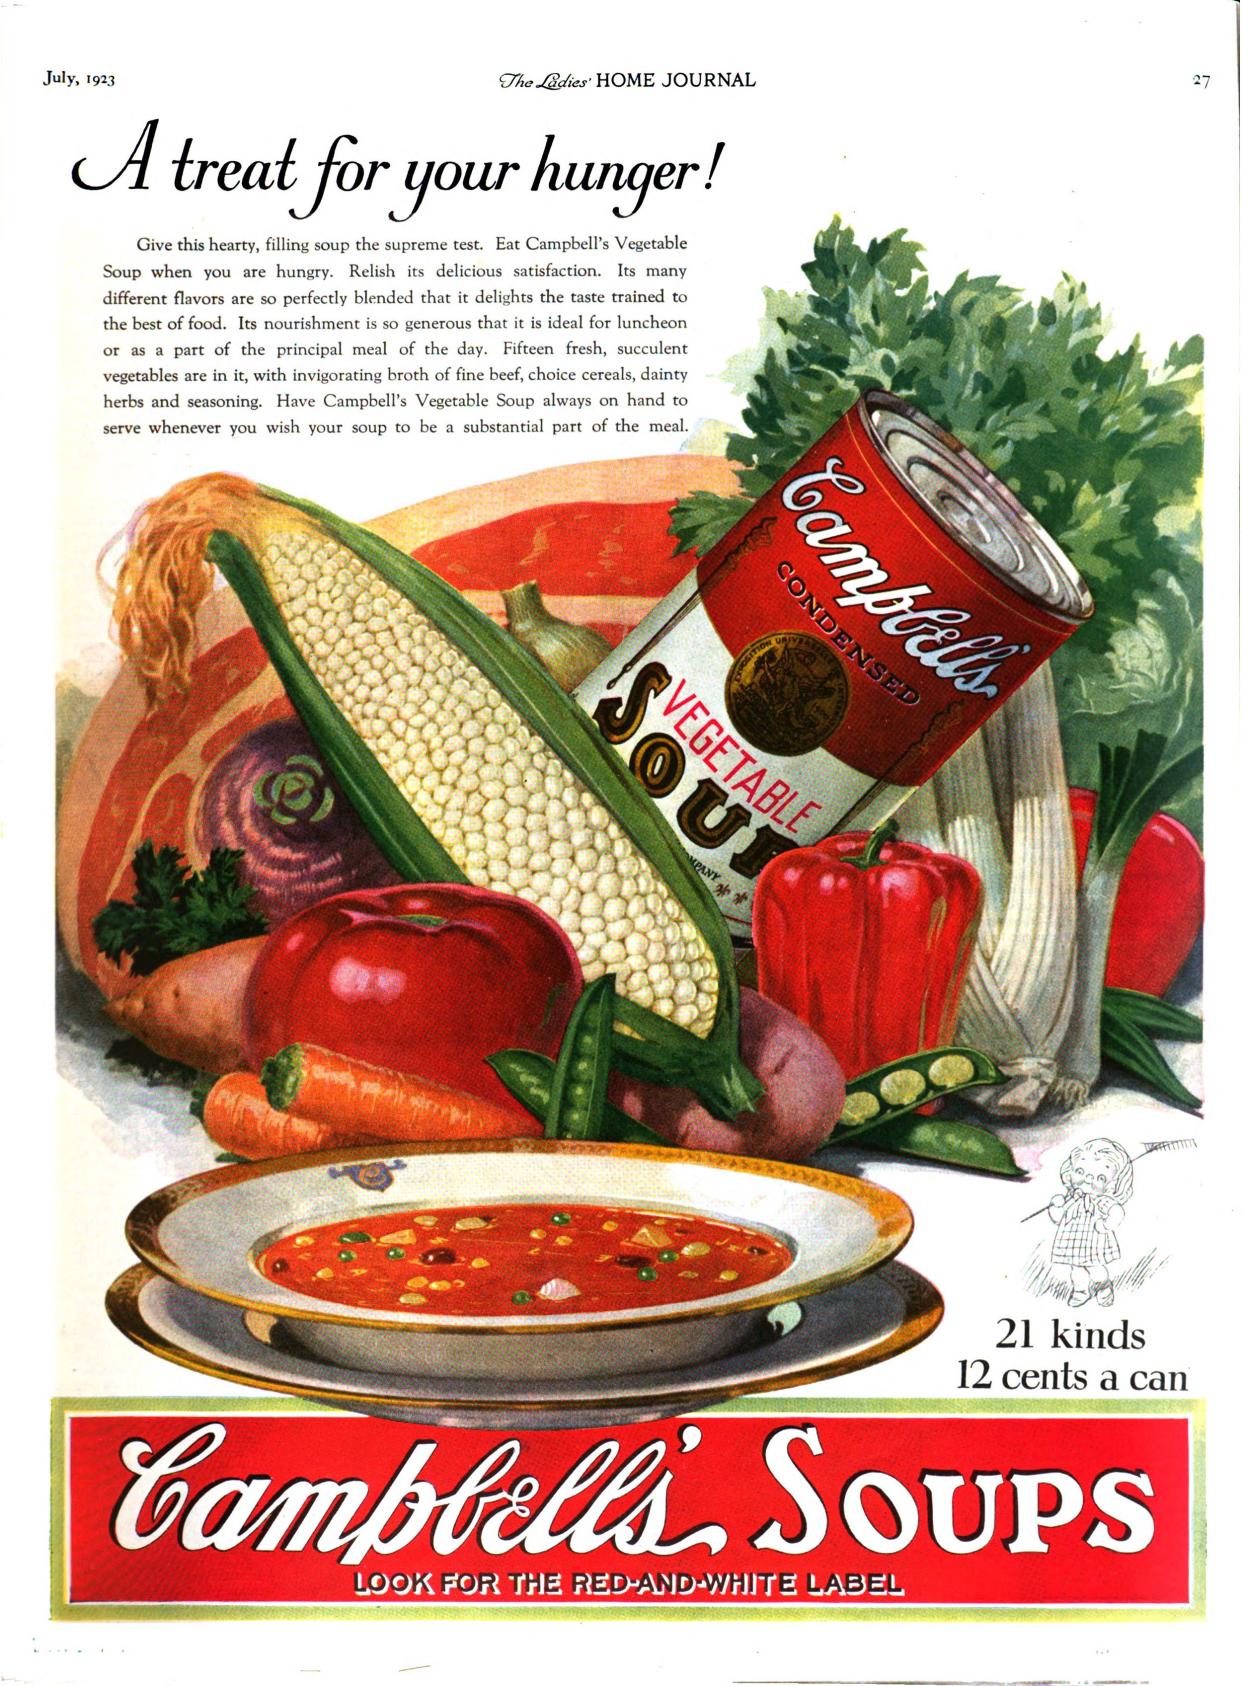 Campbell's soup ad, published in The Ladies Home Journal, 1923